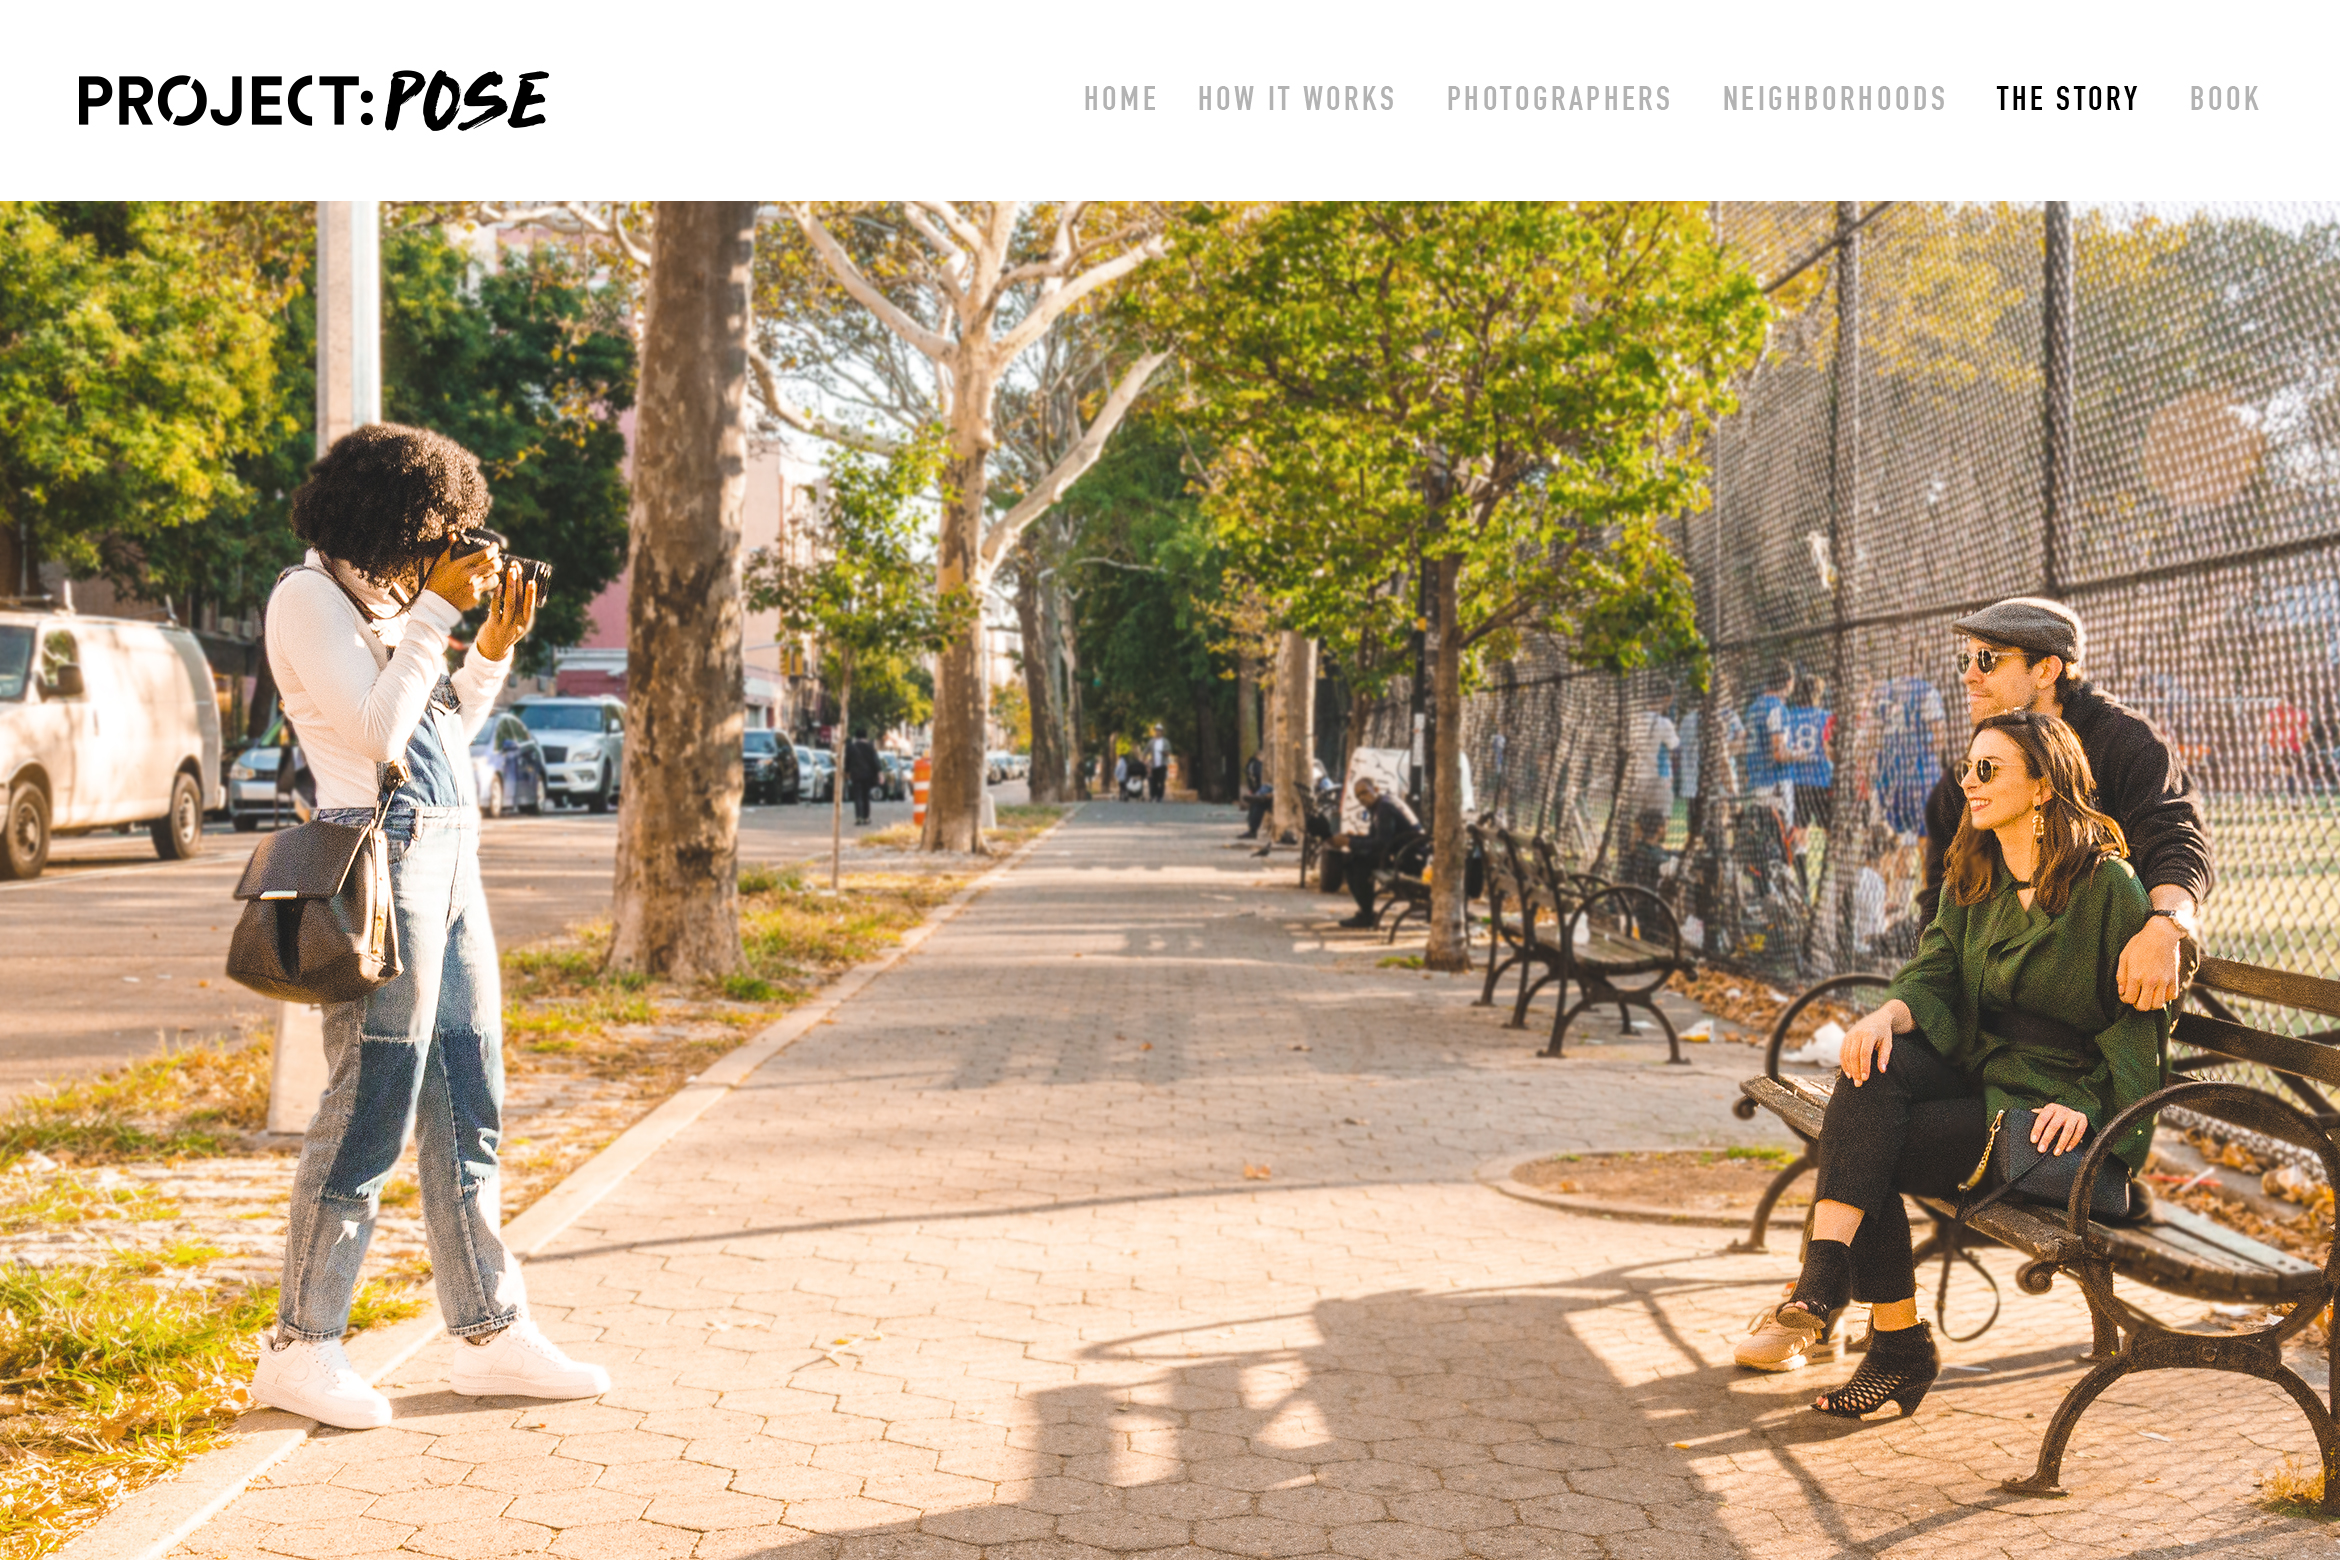 ProjectPose_Website_TheStory_1170x780x2